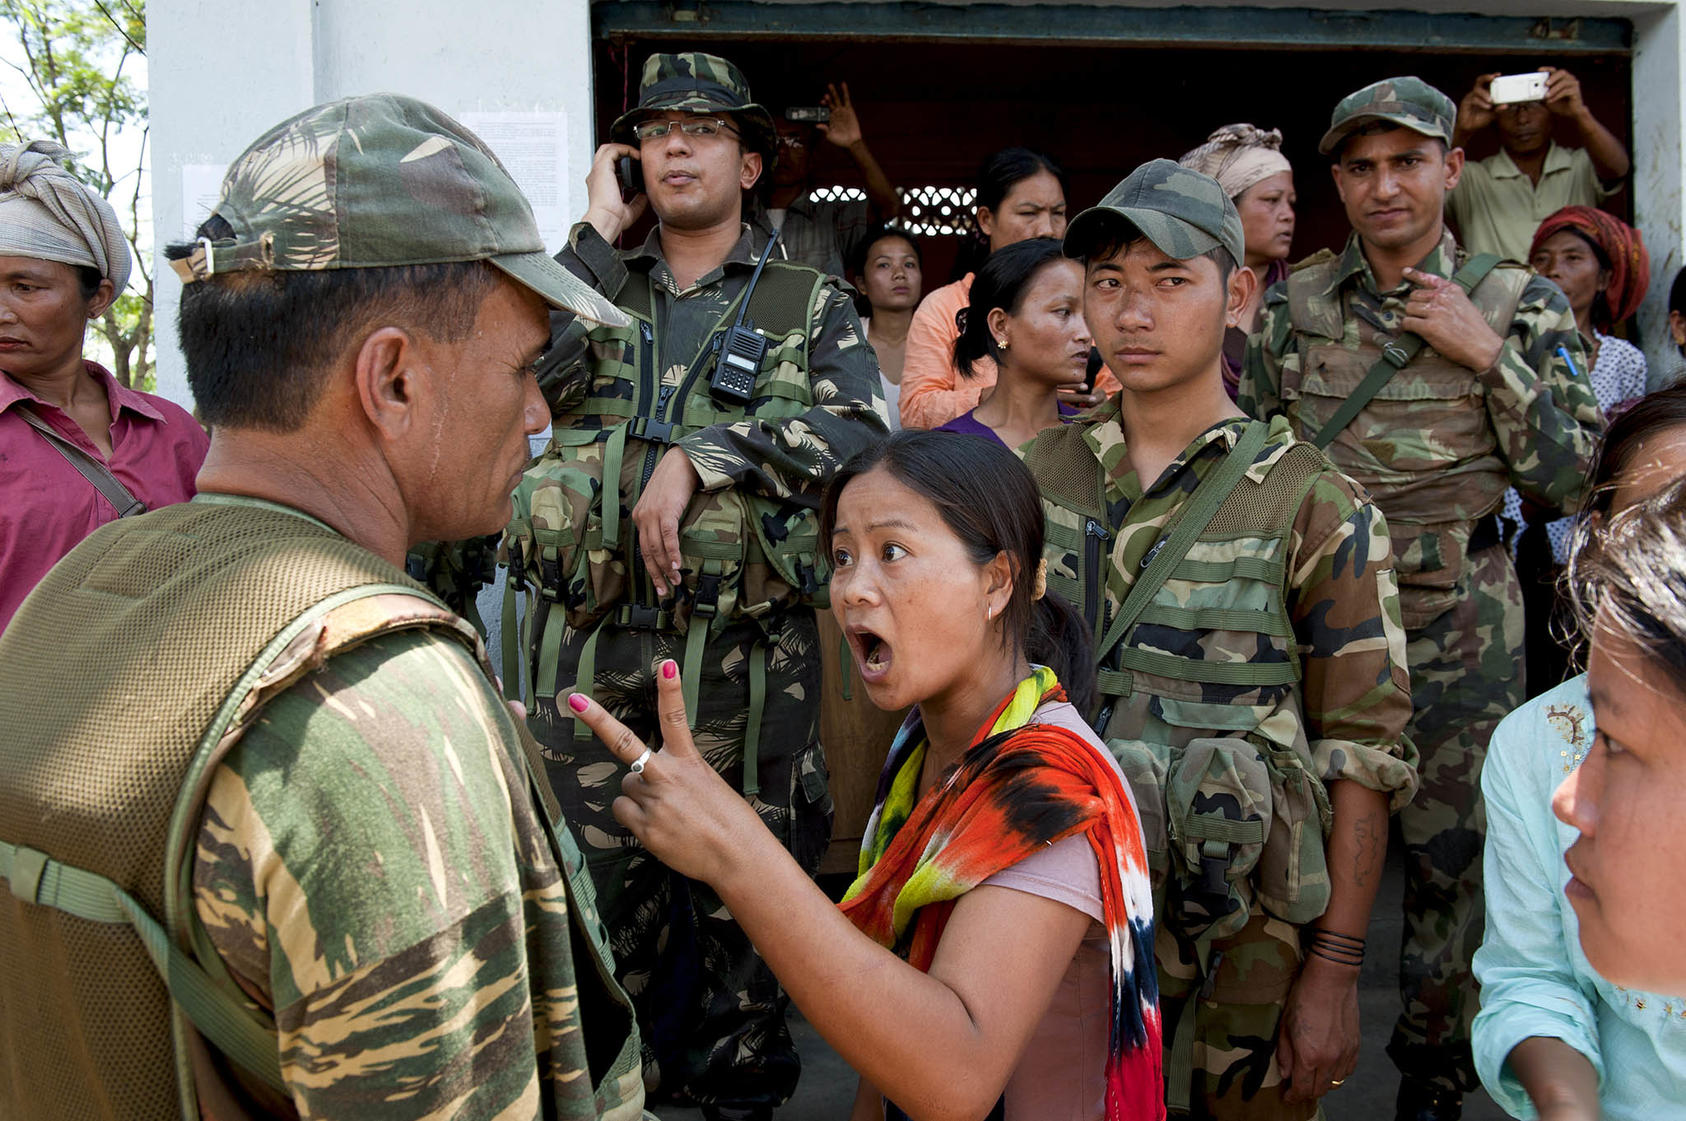 A woman gestures as she argues with an Indian army member in the village of Gamgiphai, Manipur state, India, August 31, 2011. (Manpreet Romana/The New York Times)